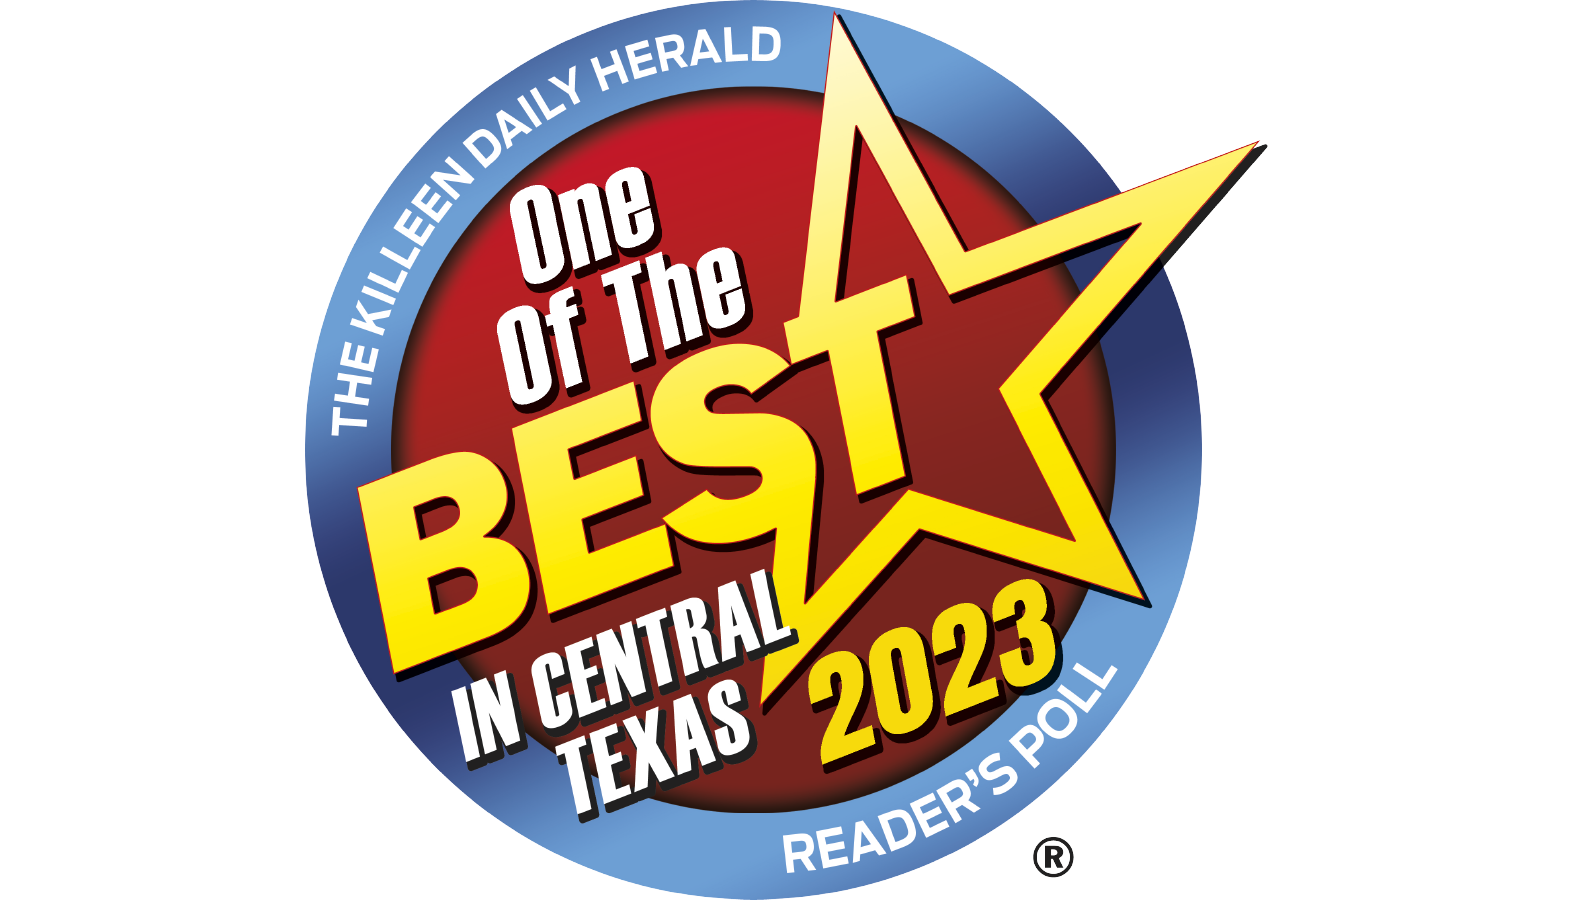 The Killeen Daily Herald One of the Best in Central Texas 2023 Reader's Poll Award